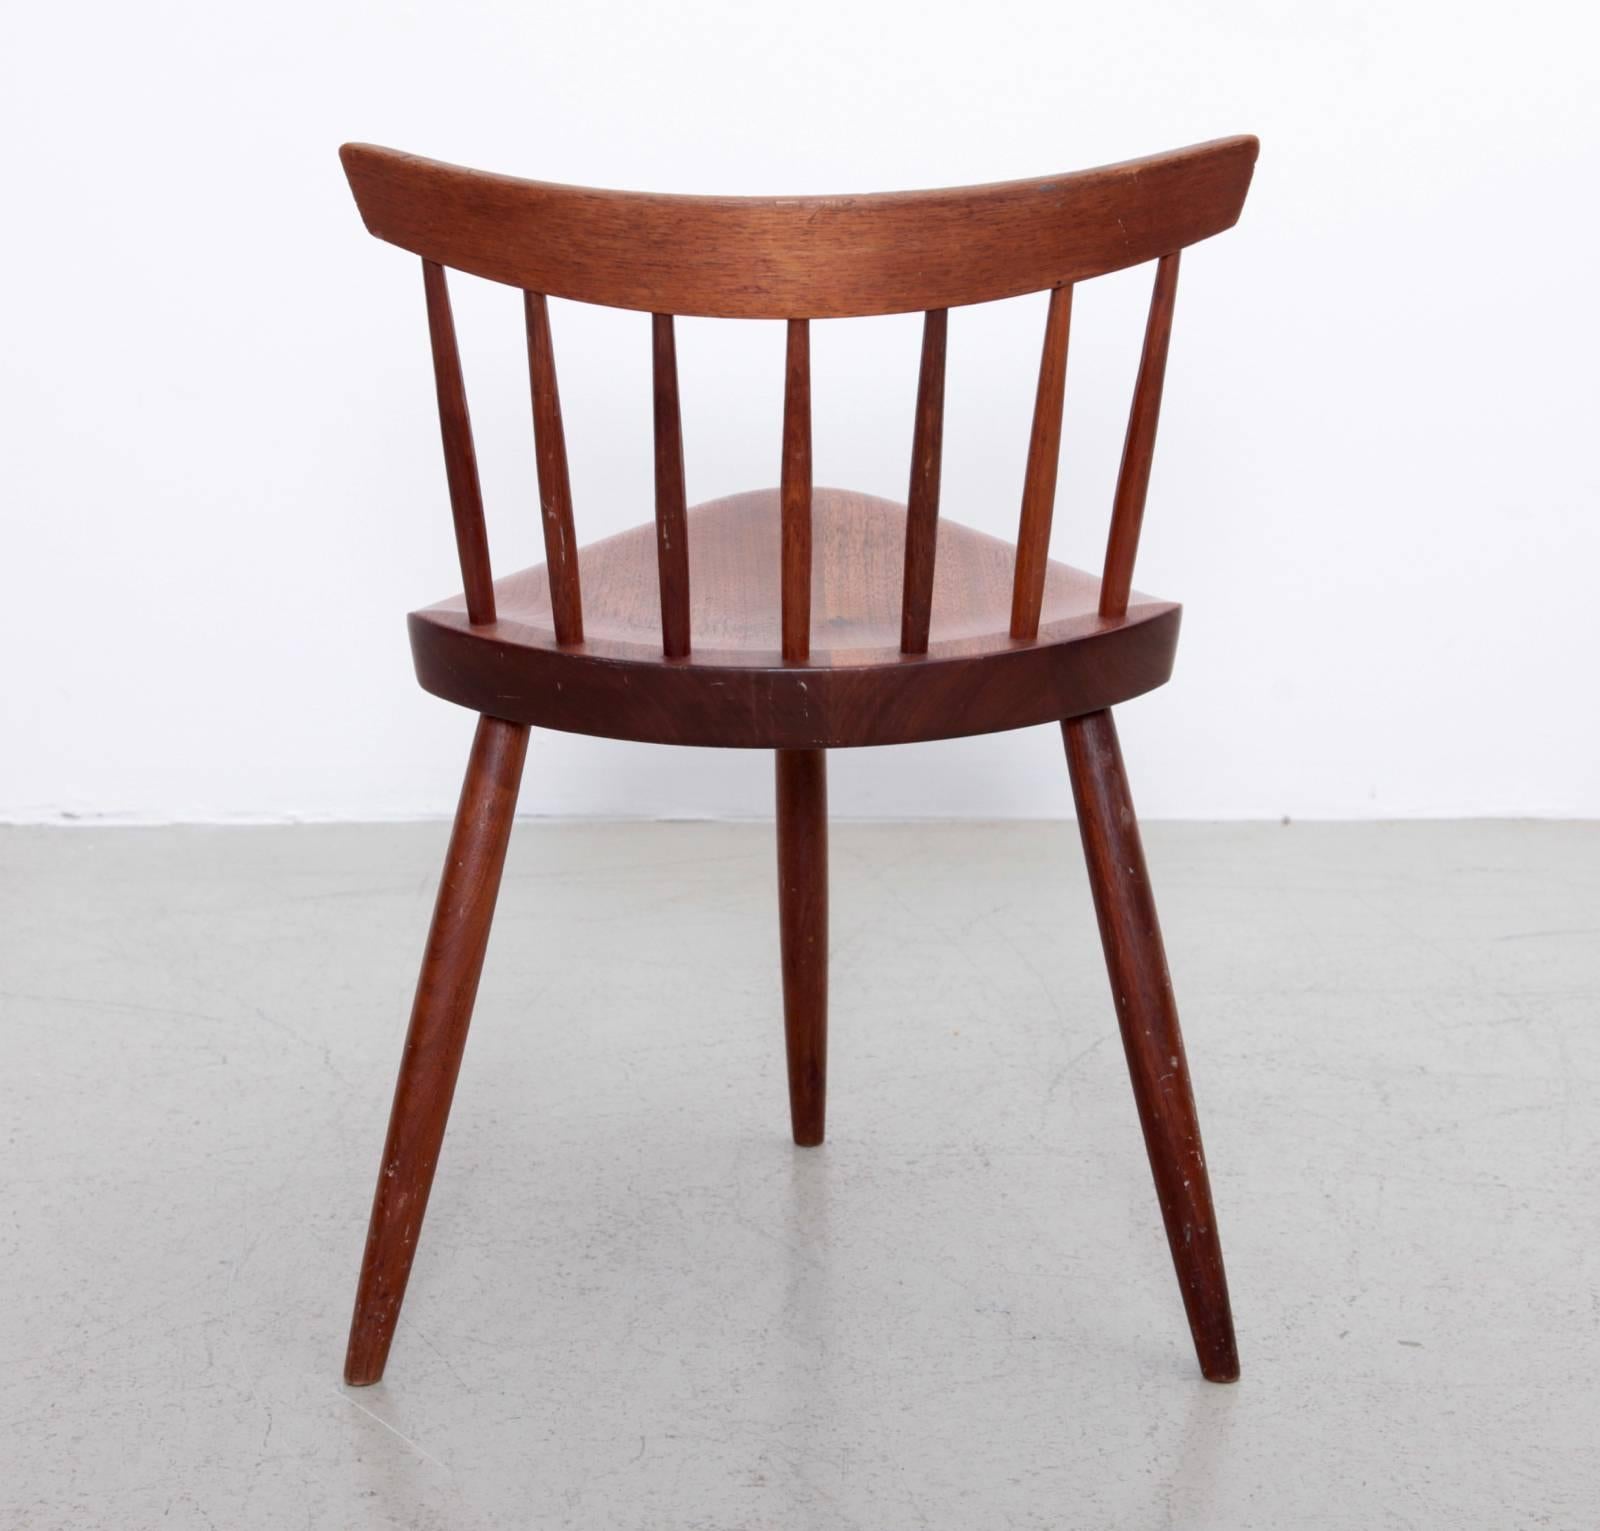 Early vintage version of the Mira Chair. The chair shows wear of age at the sides which makes it even more beautiful. The bottom of the seat still shows lines and a name of the original buyer.

*This piece is curated by Original in Berlin*